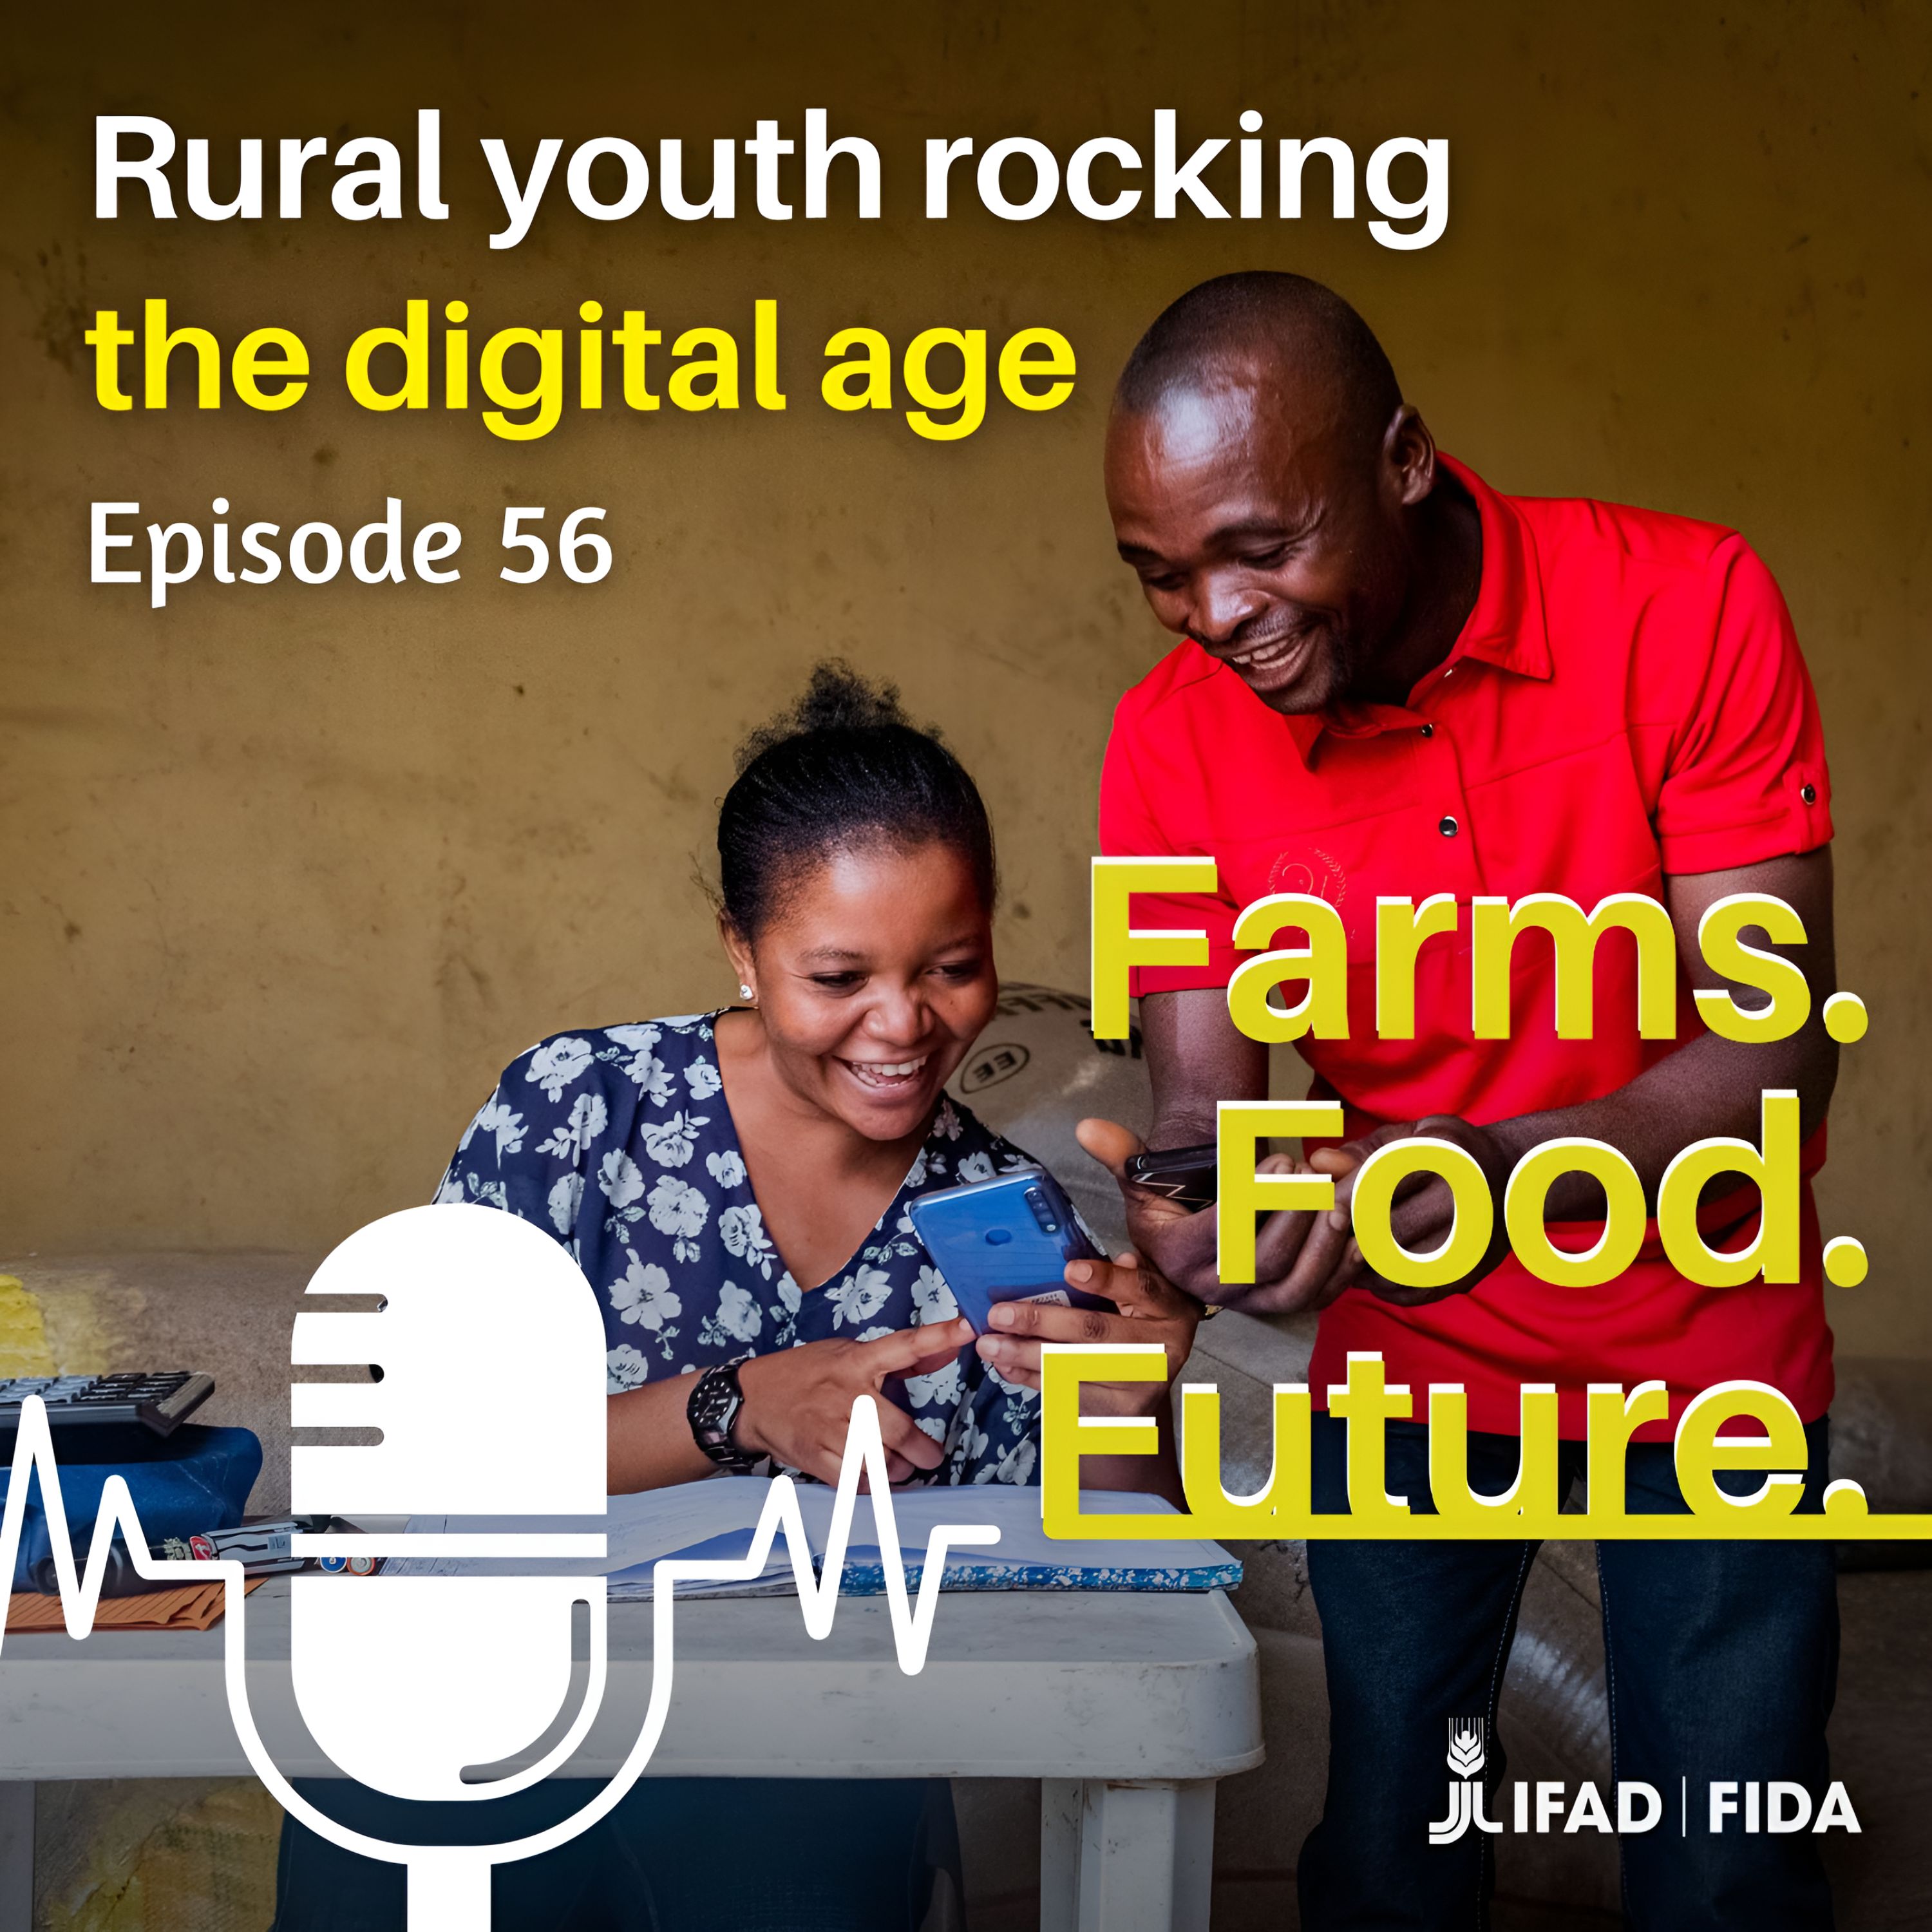 Rural youth rocking the digital age